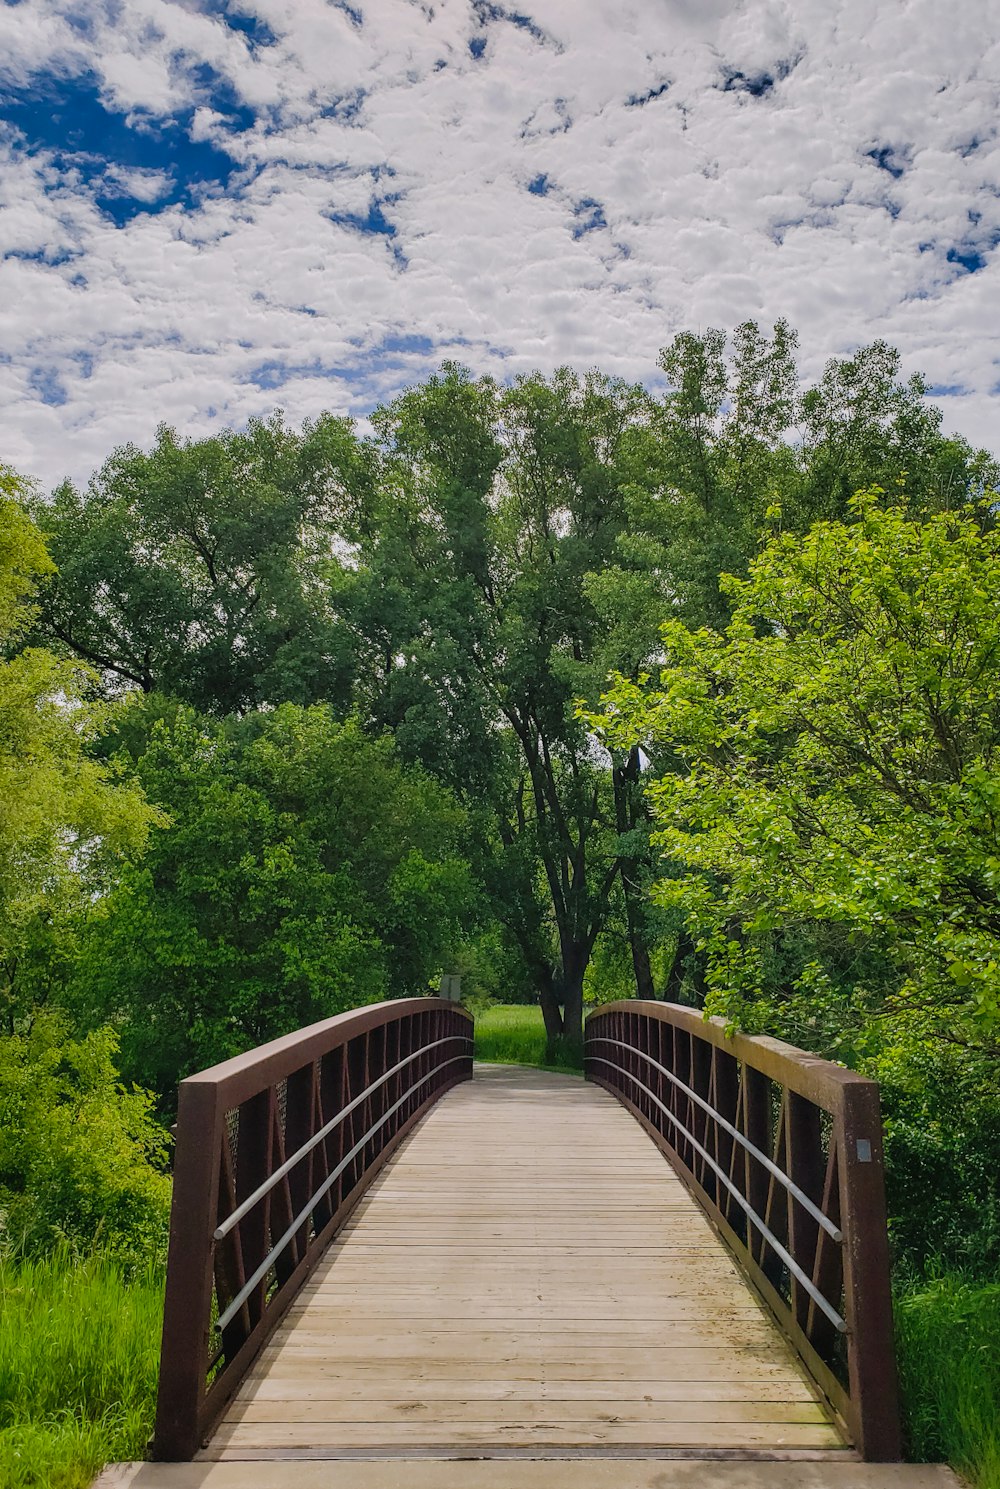 brown wooden bridge over green trees under blue sky and white clouds during daytime